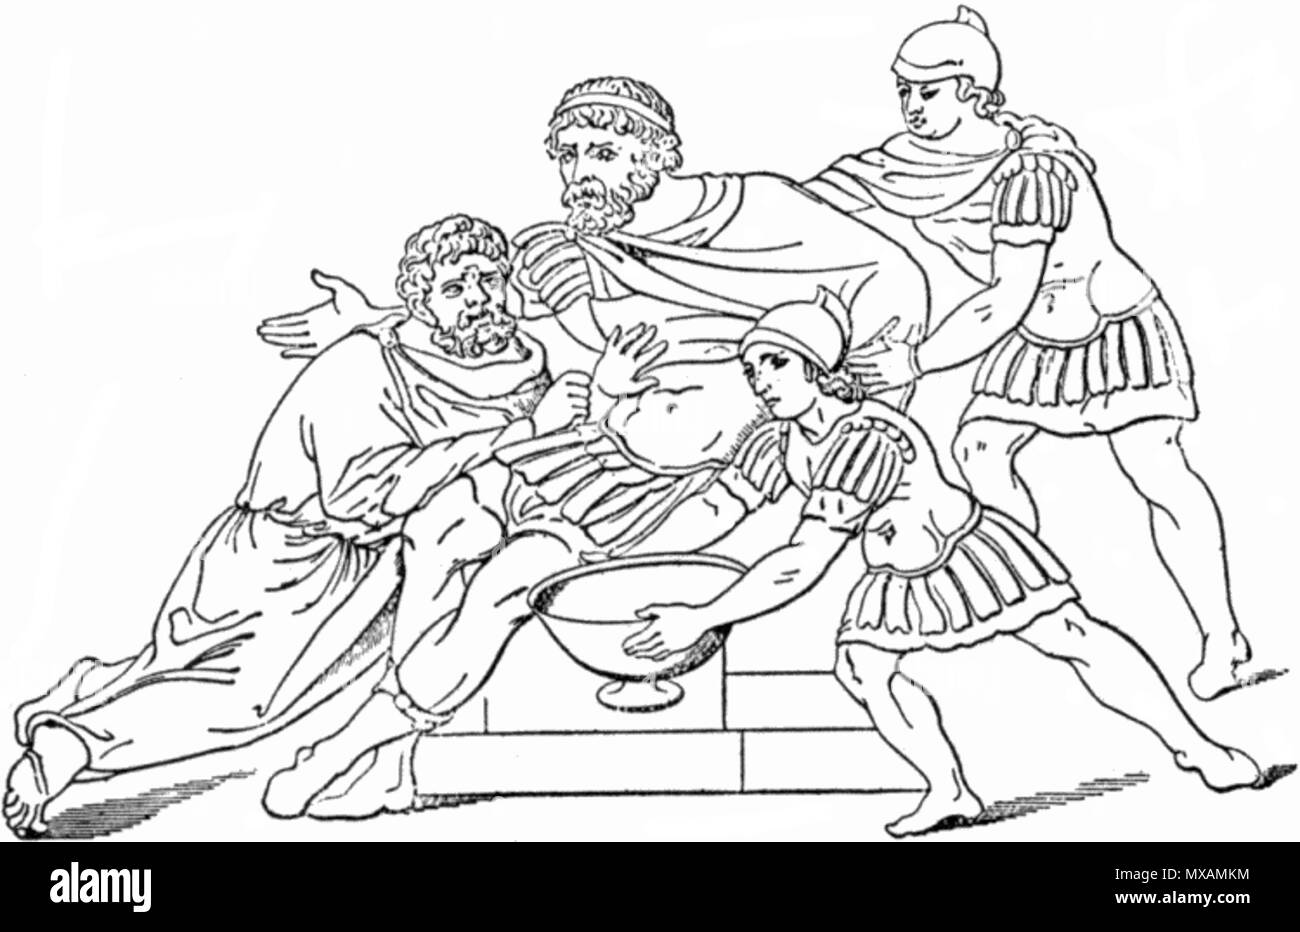 . Machaon (Son of Asklepios), The first Greek military surgeon, attending to the wounded Menelaus. 07/12/2008. Unknown 294 Illus-035 Stock Photo